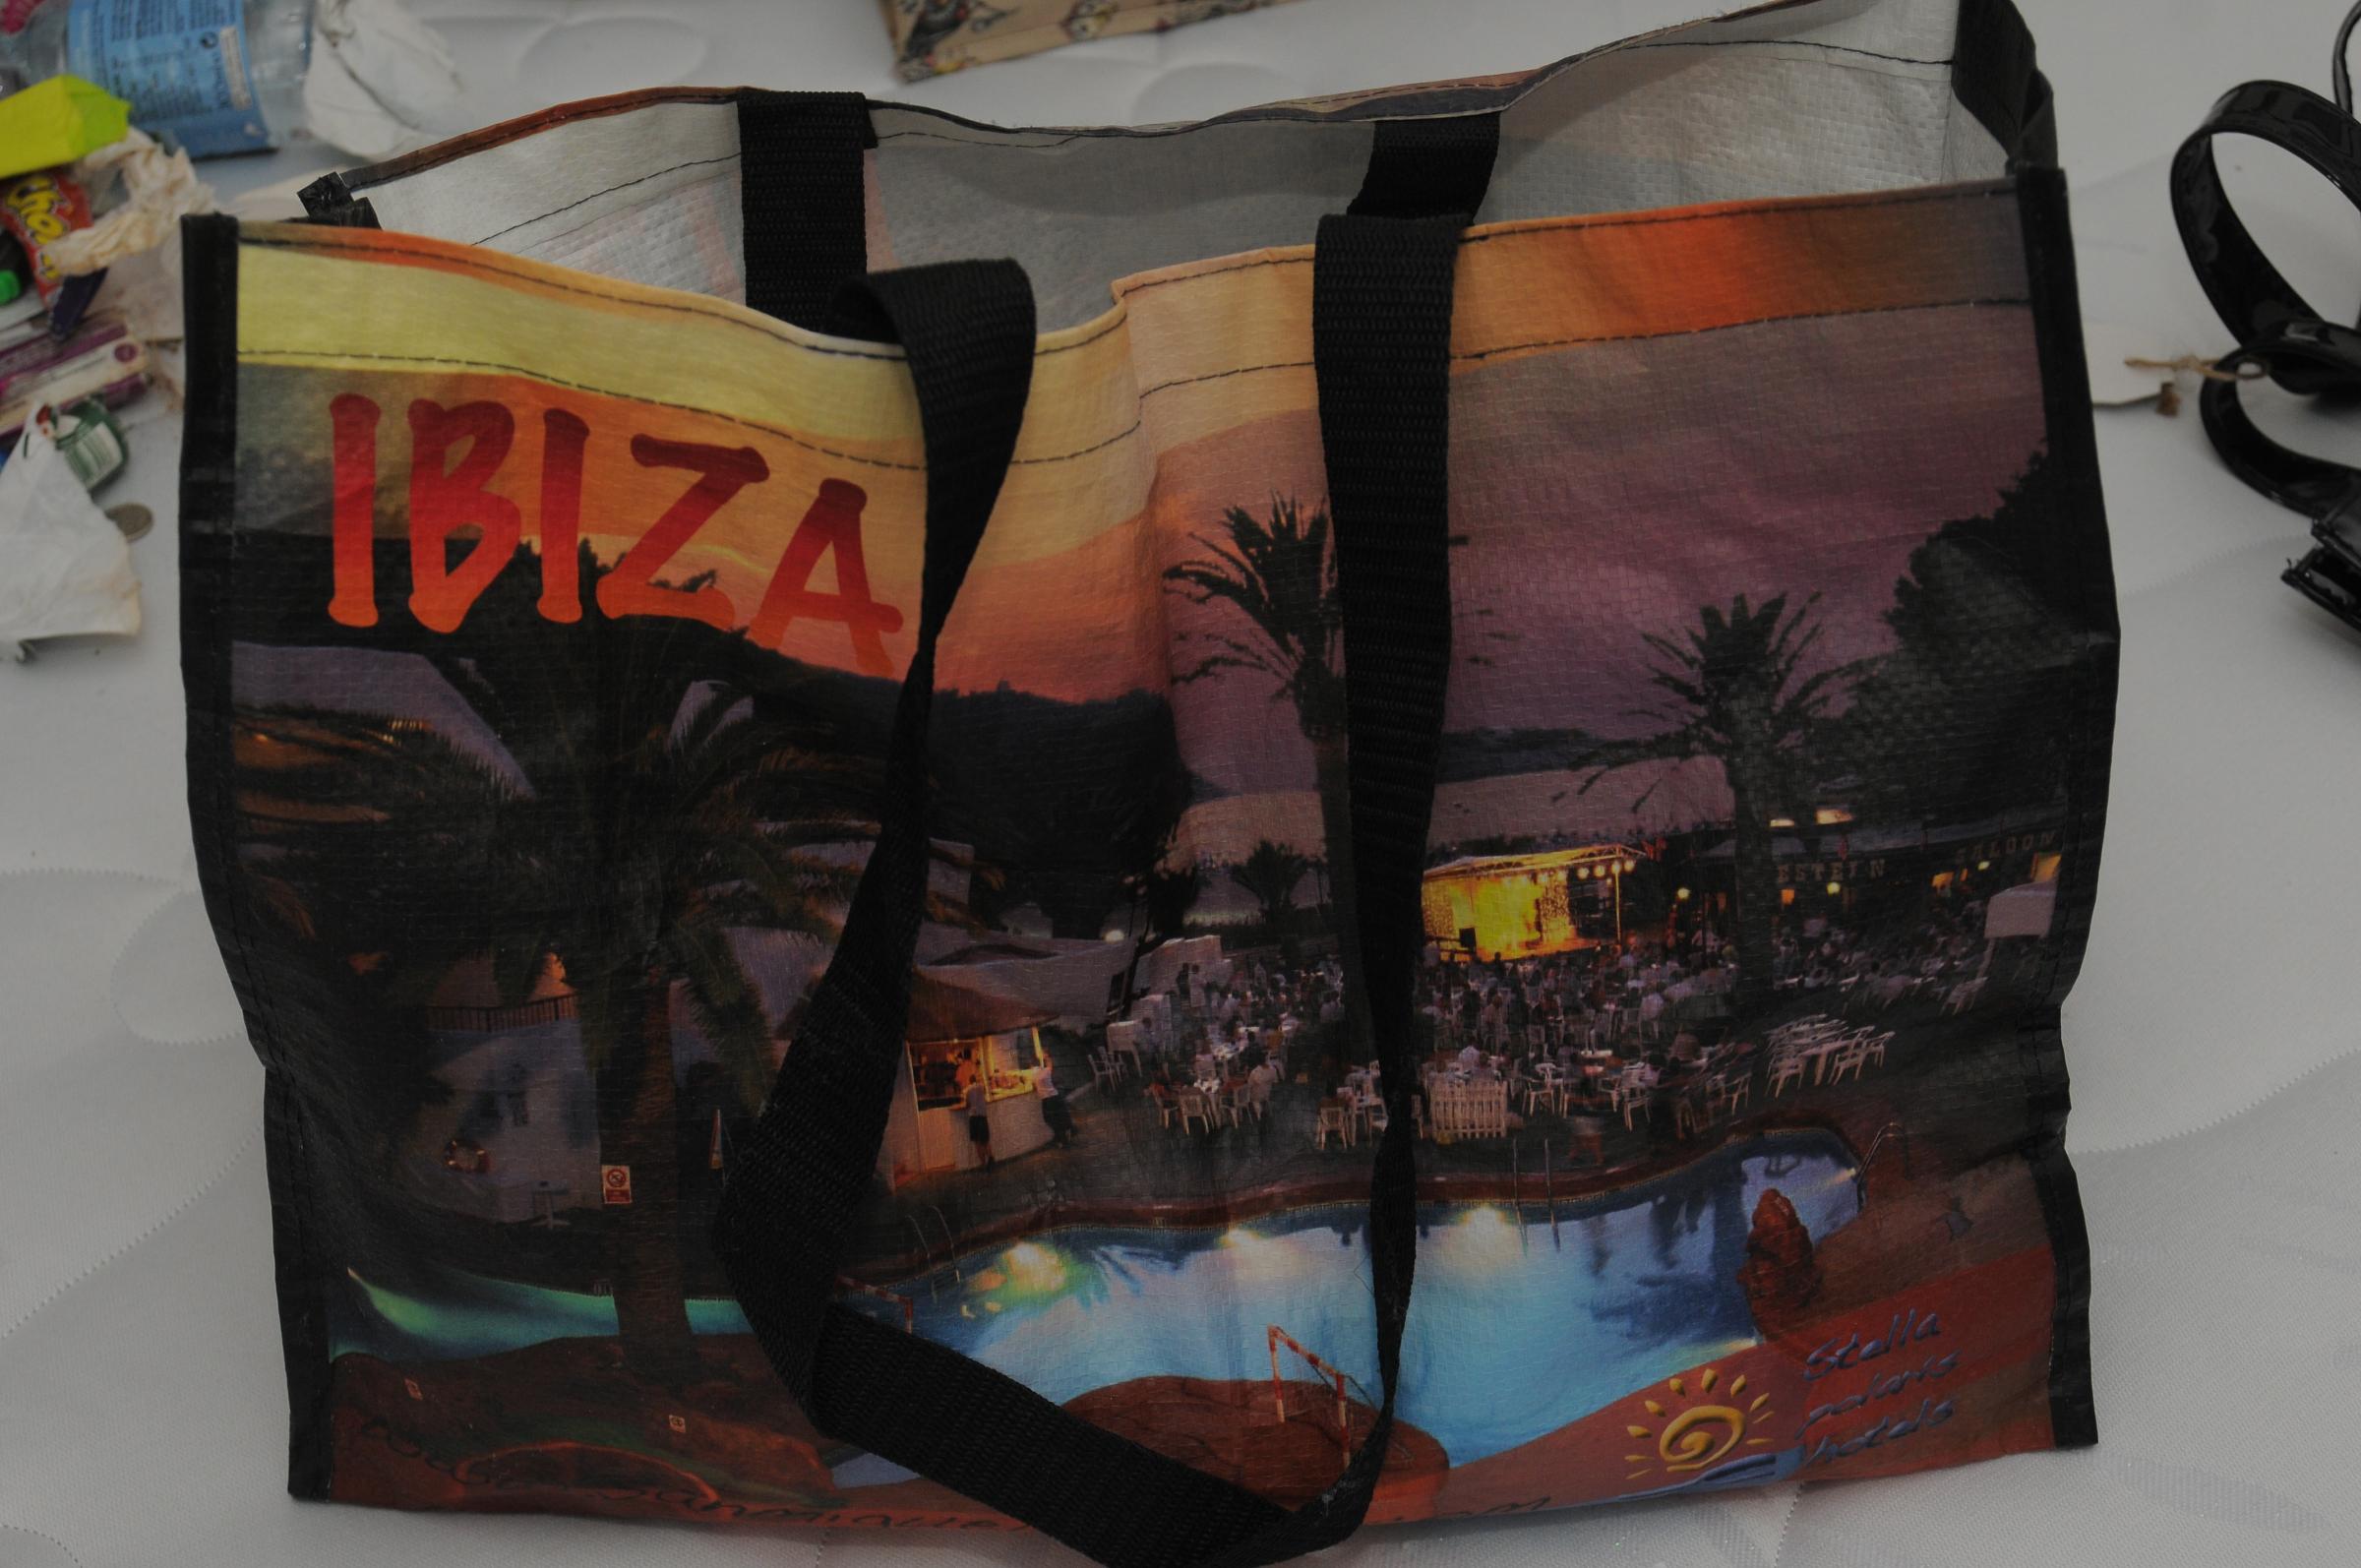 Lucy Letbys Ibiza bag. Image: Cheshire Constabulary.